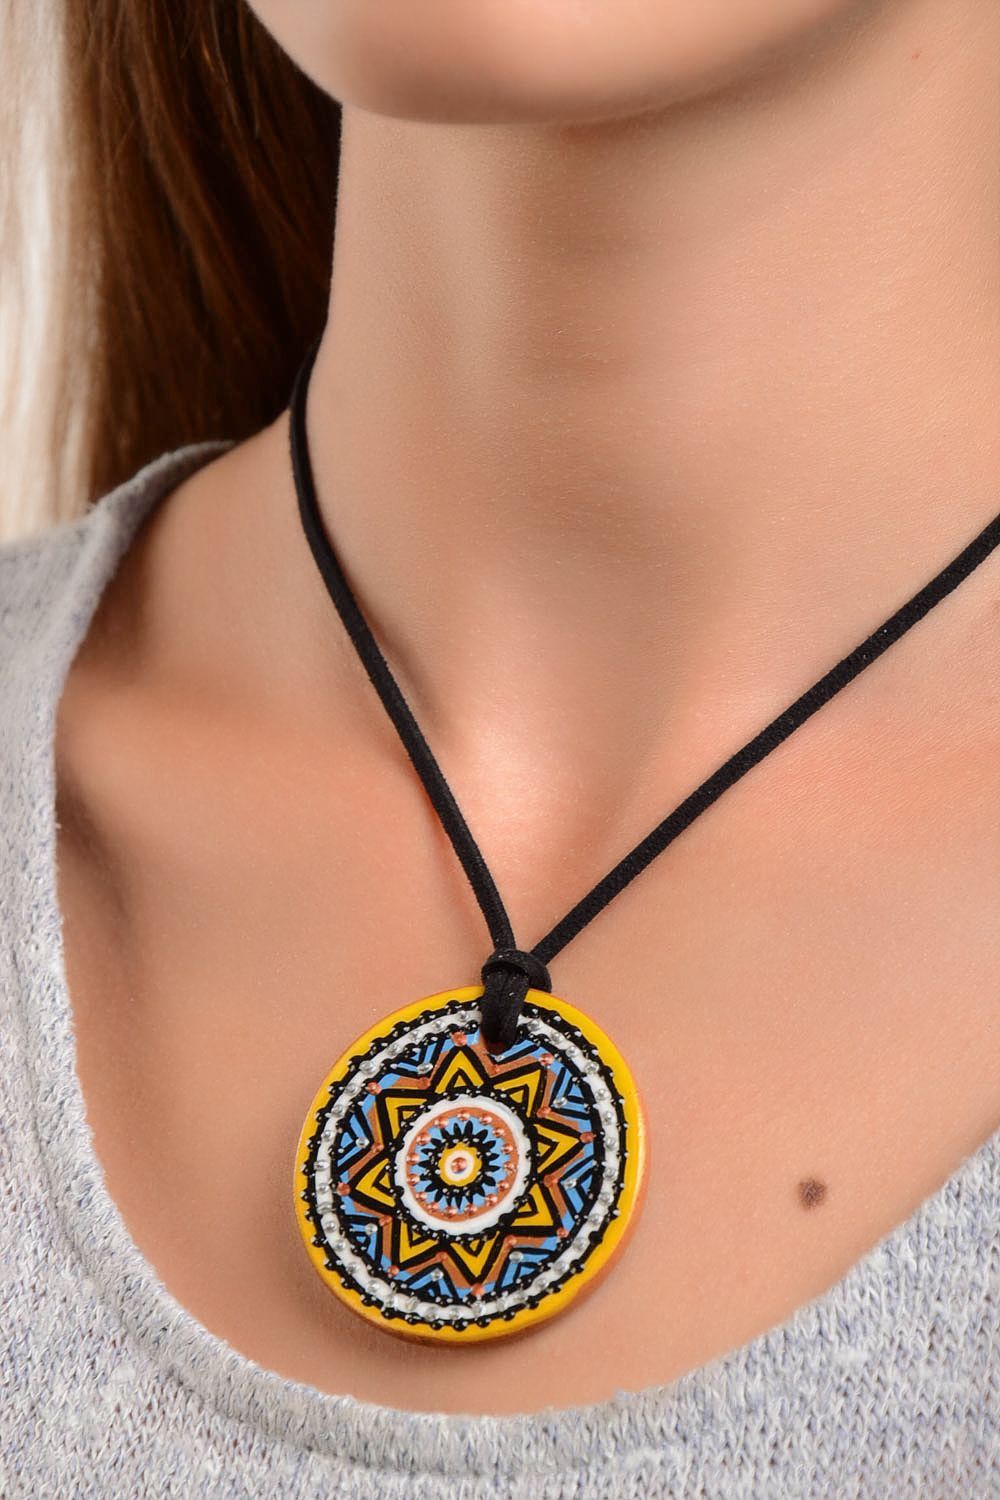 Pendant necklace ceramic jewelry handmade necklace ethnic jewelry gift for girl photo 1